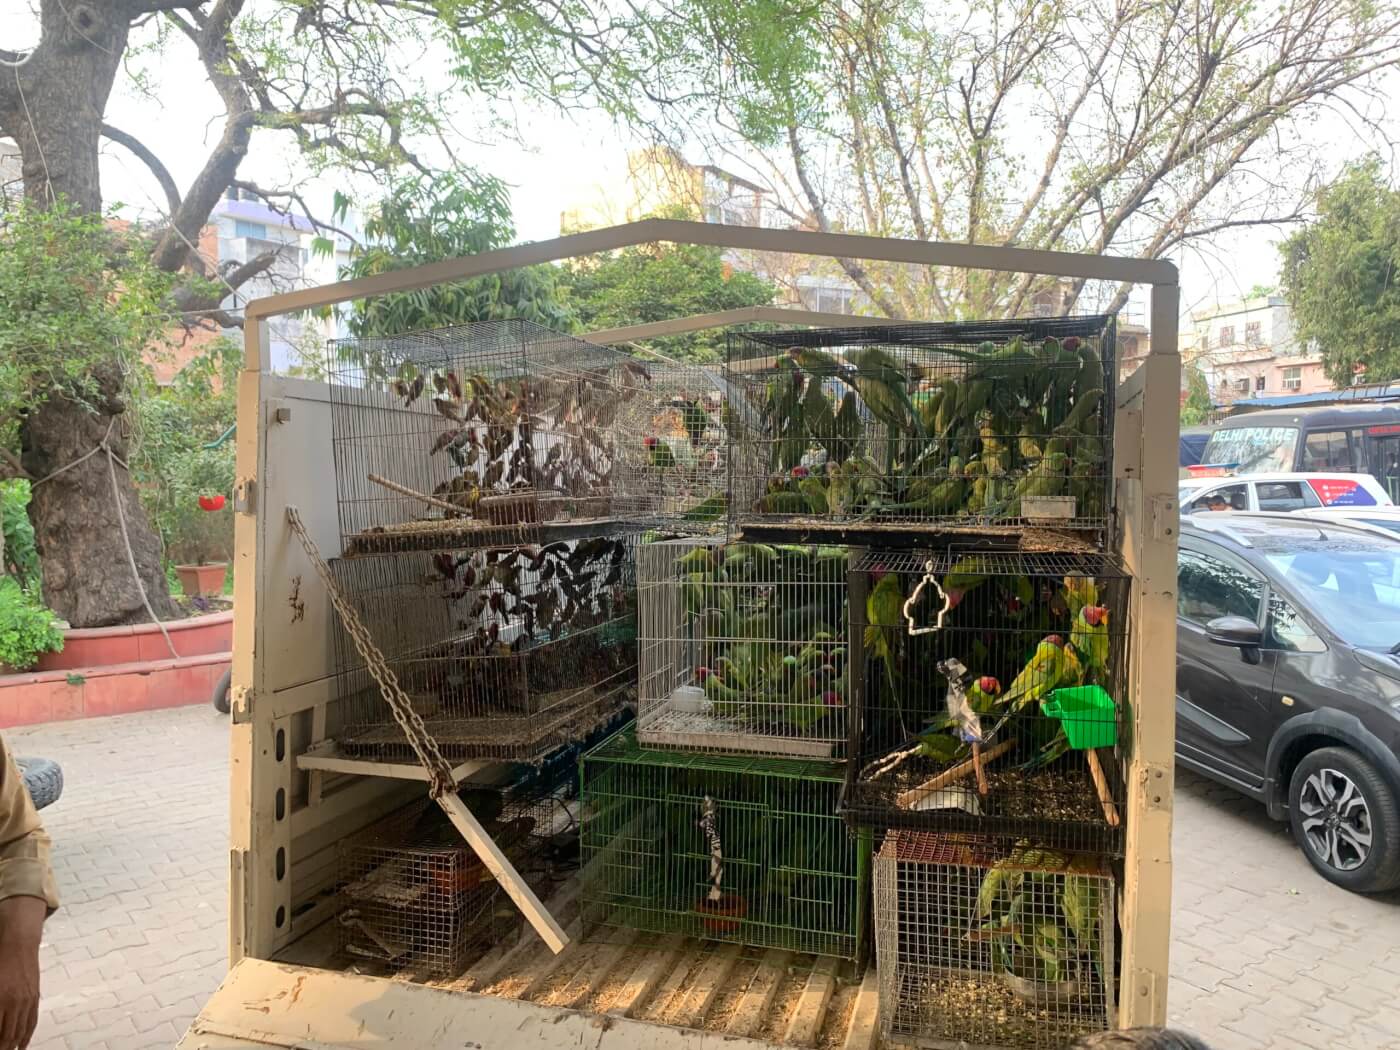 Following a PETA India Complaint, Thousands of Parakeets and Other Birds  Were Rescued in a Raid on Kabutar Market in Delhi - Blog - PETA India